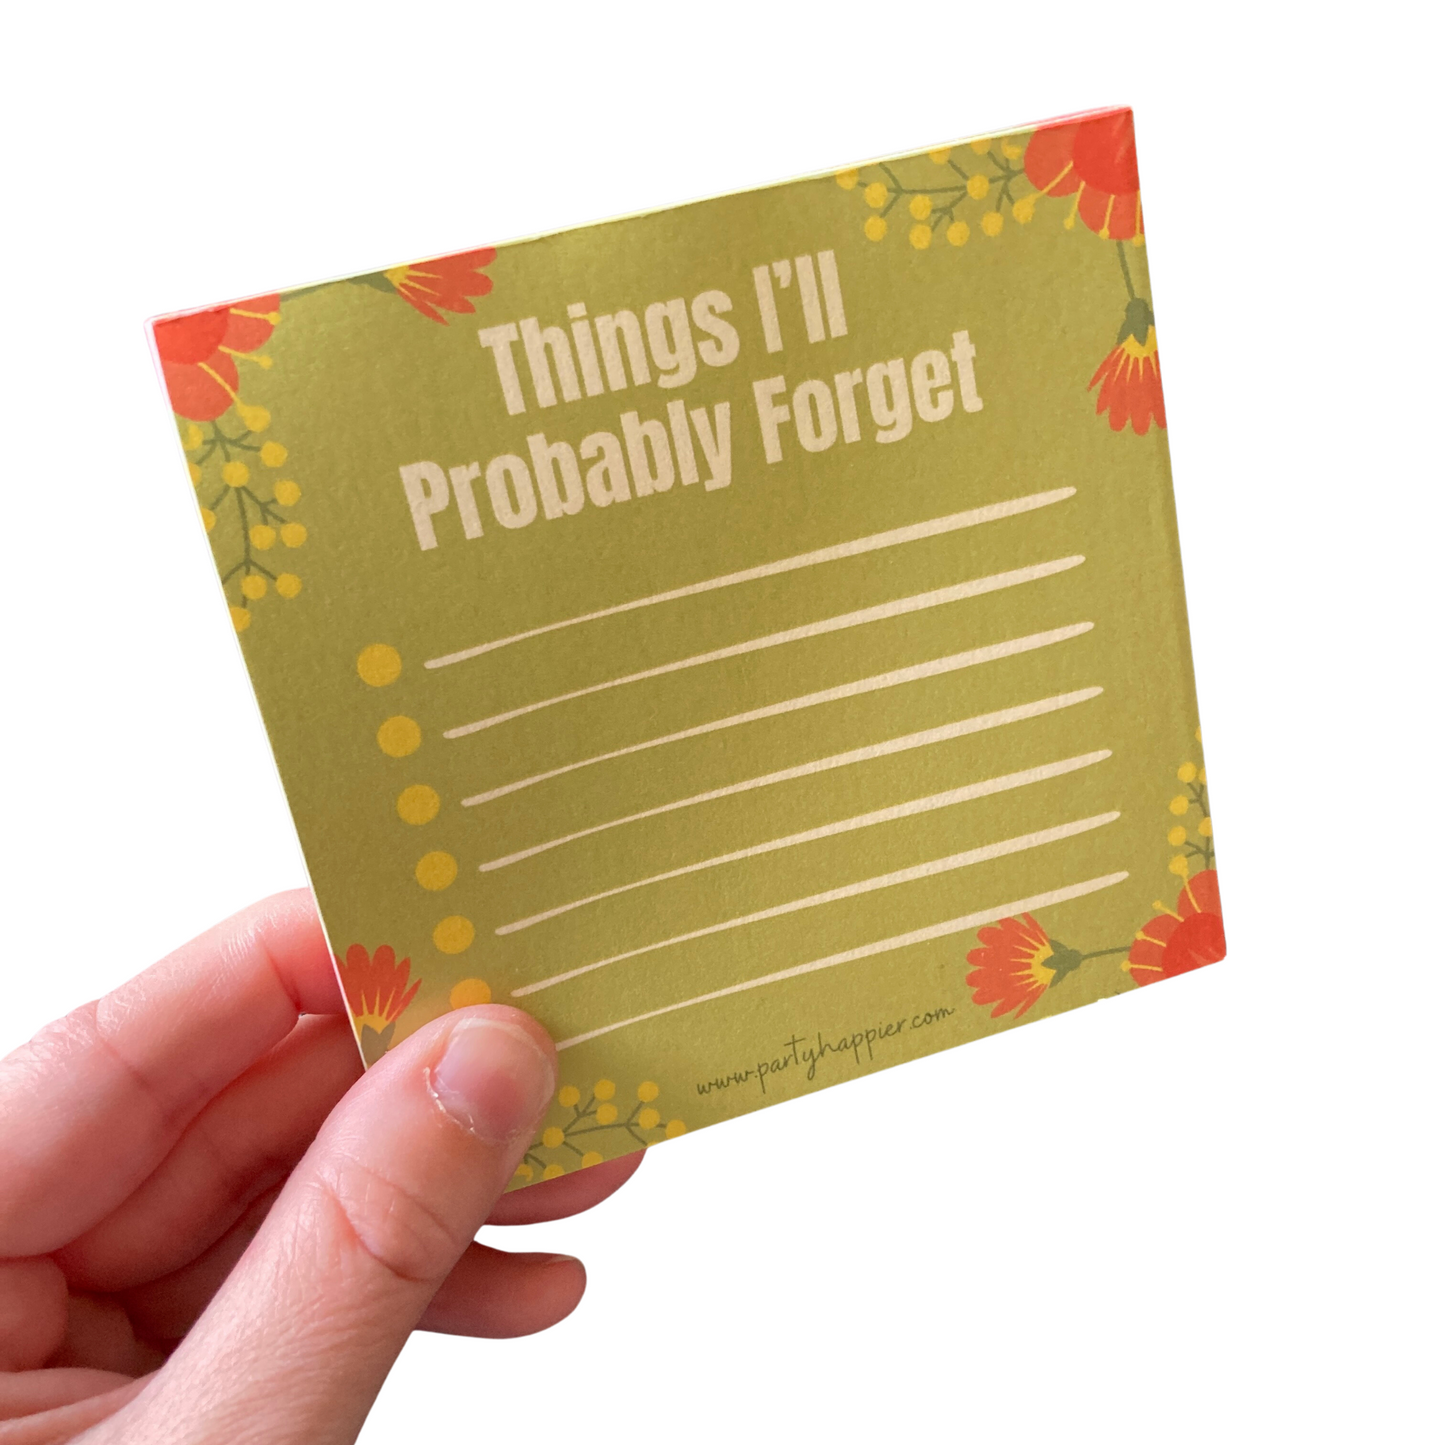 4x4 Things I'll Probably Forget Notepad